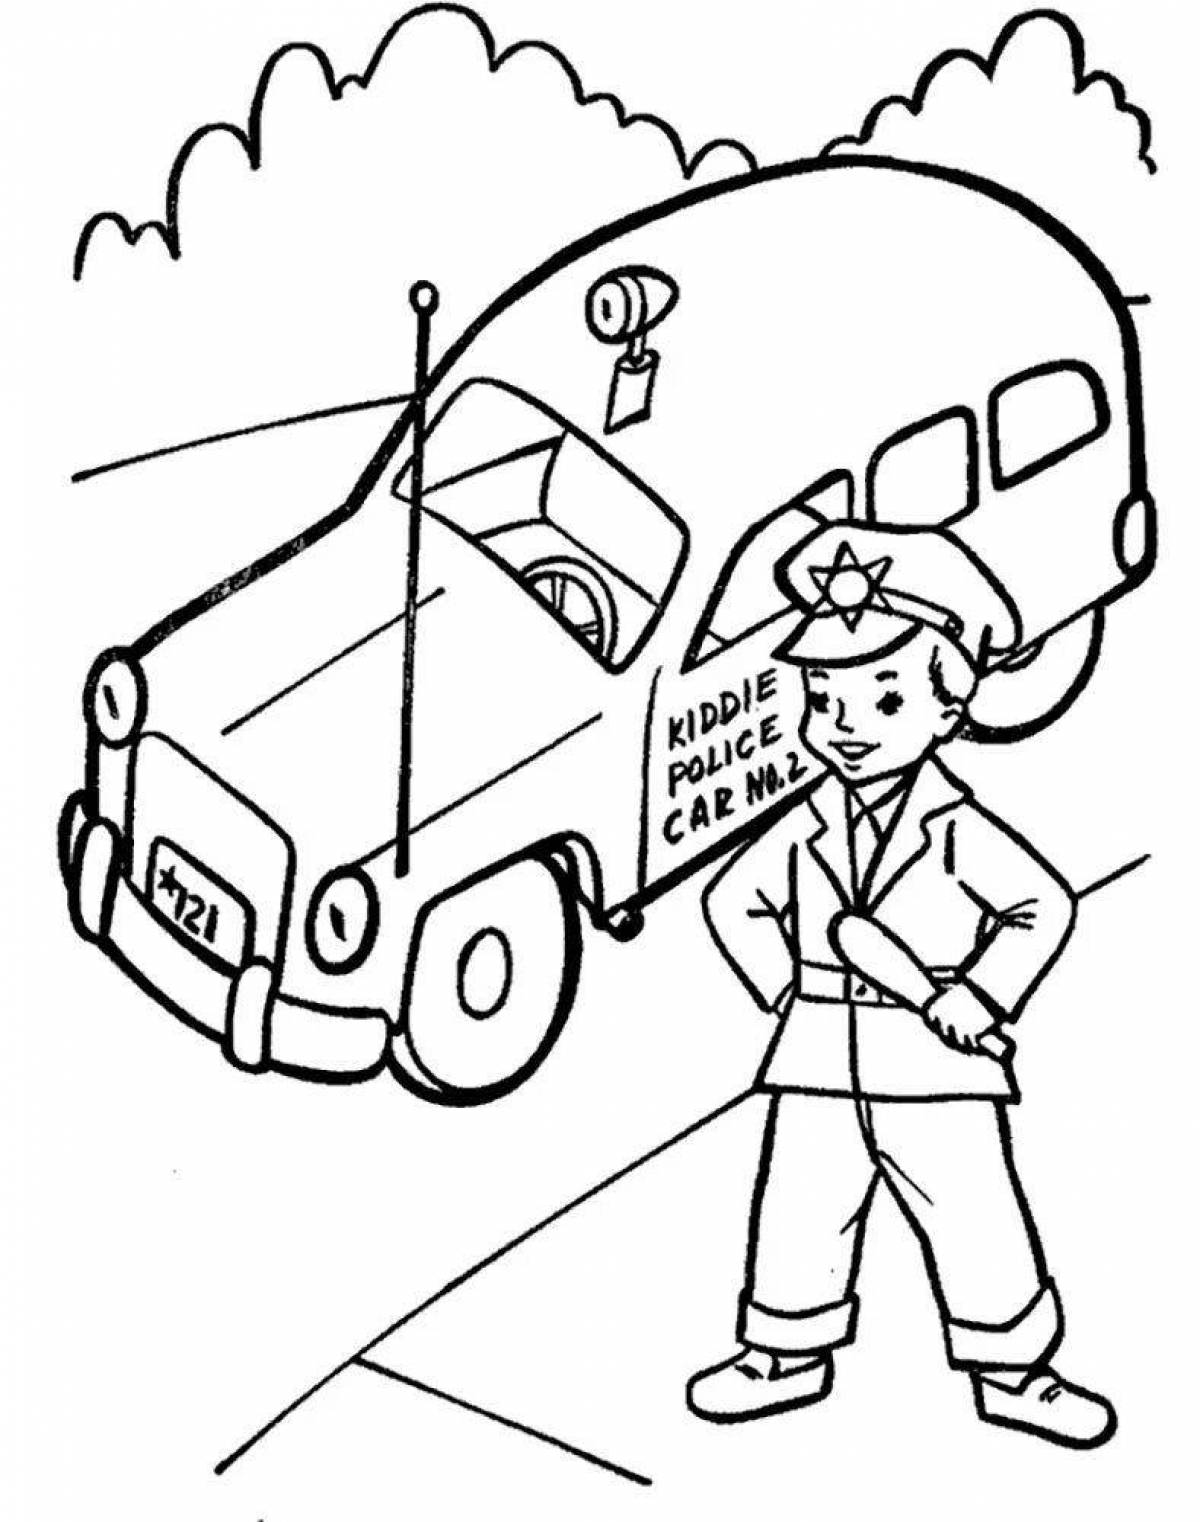 Colorful police profession coloring page